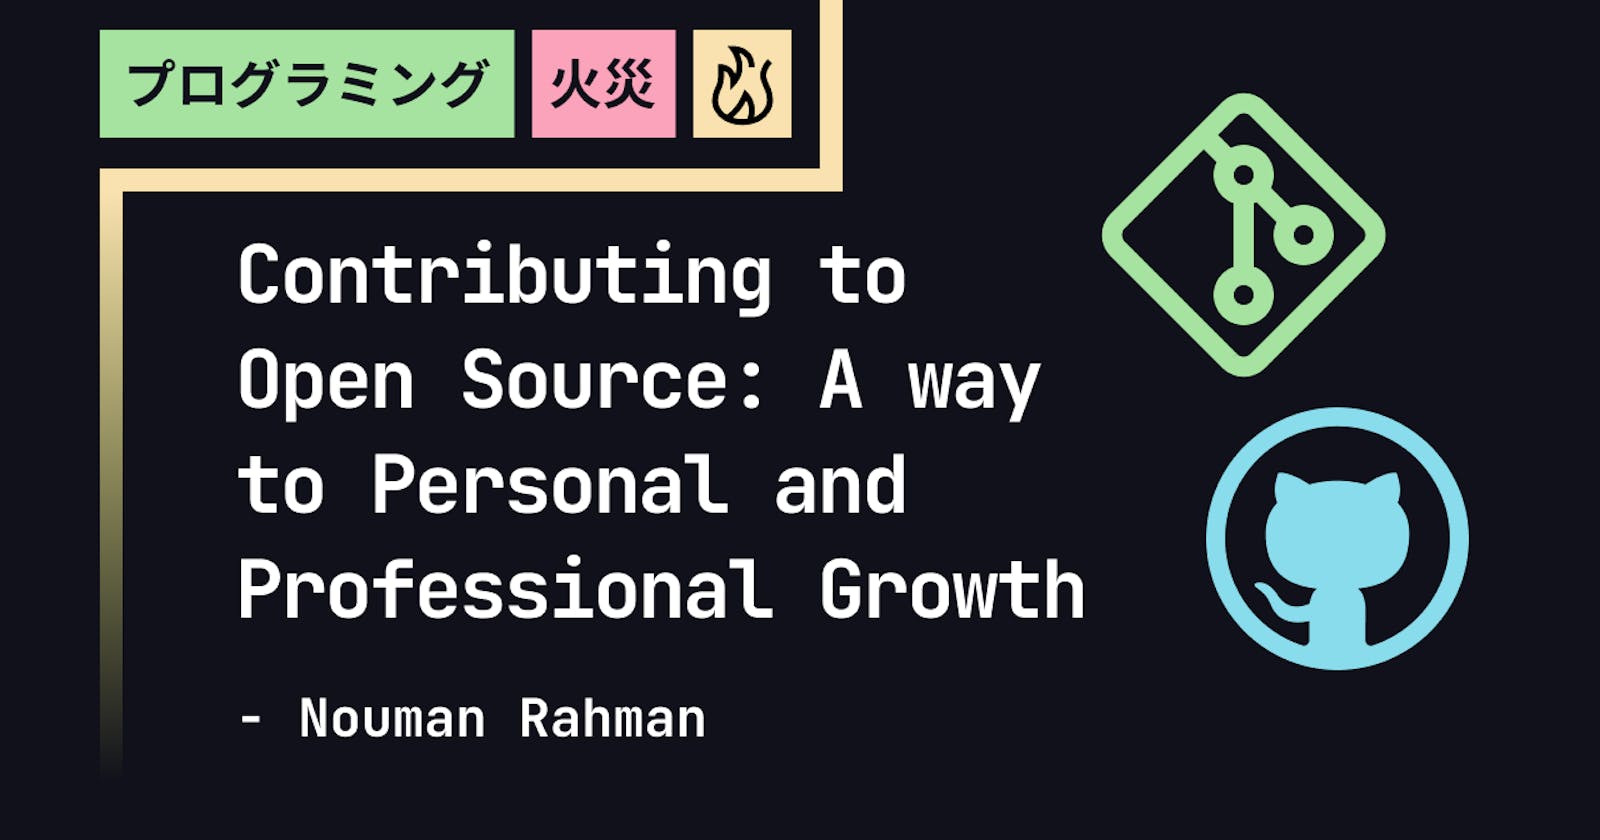 Contributing to Open Source: A way to Personal and Professional Growth